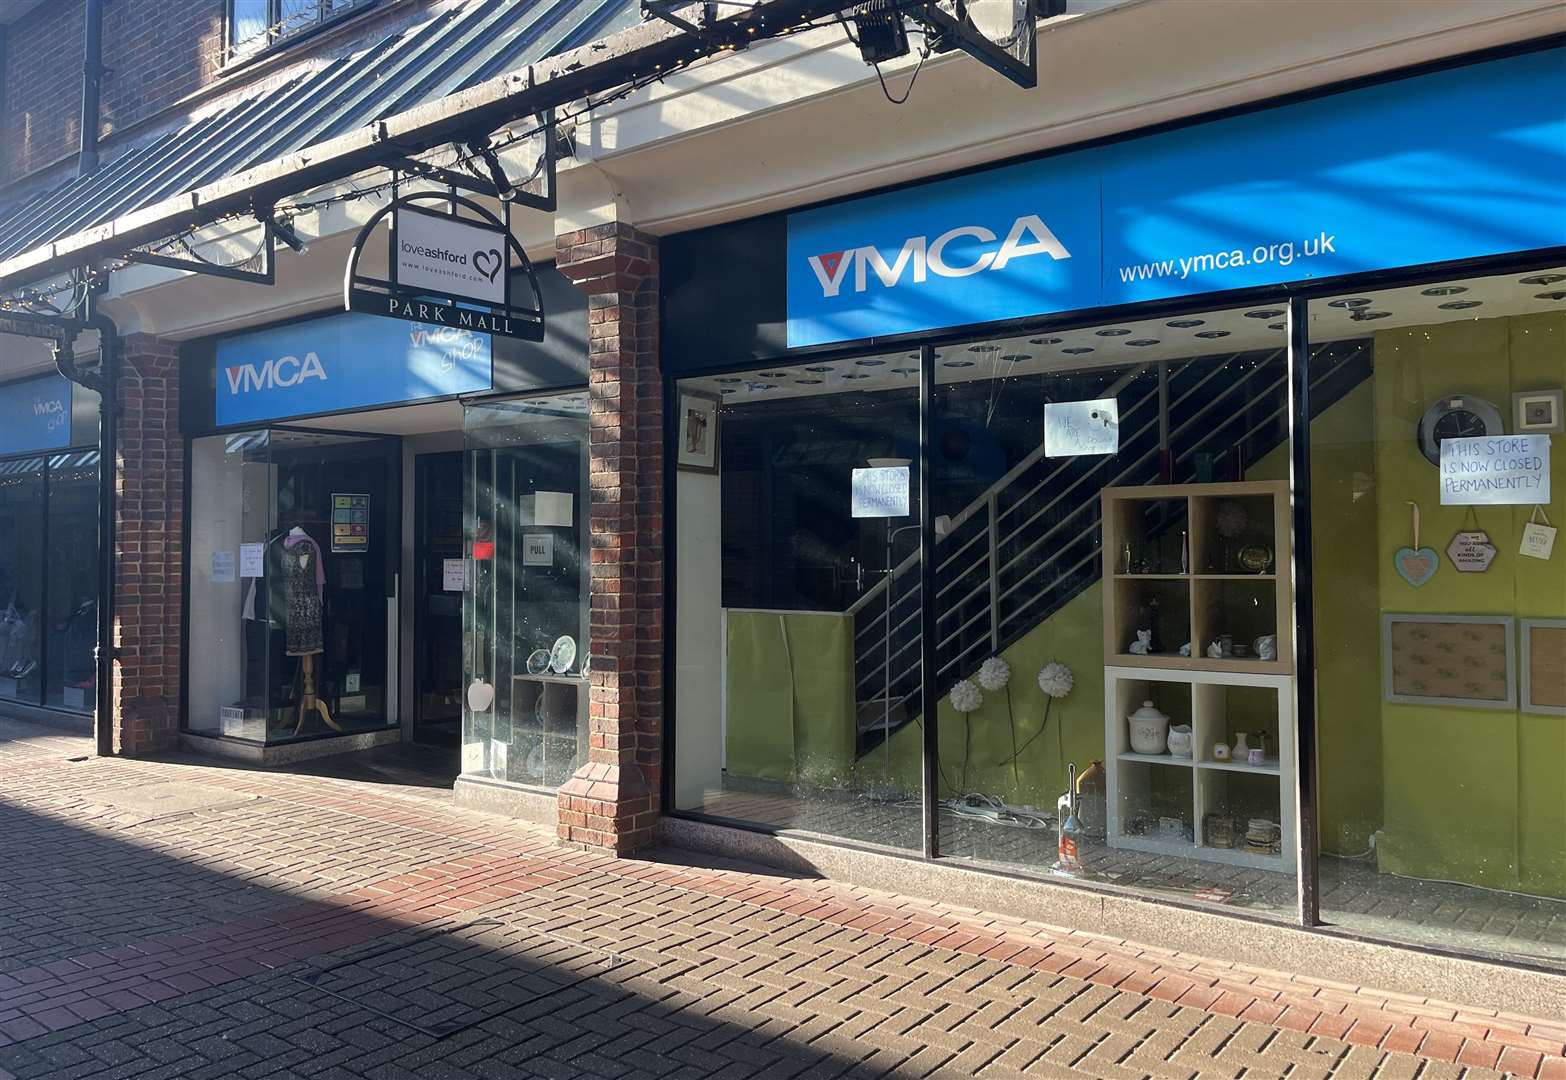 The YMCA charity shop in Park Mall has now shut for good